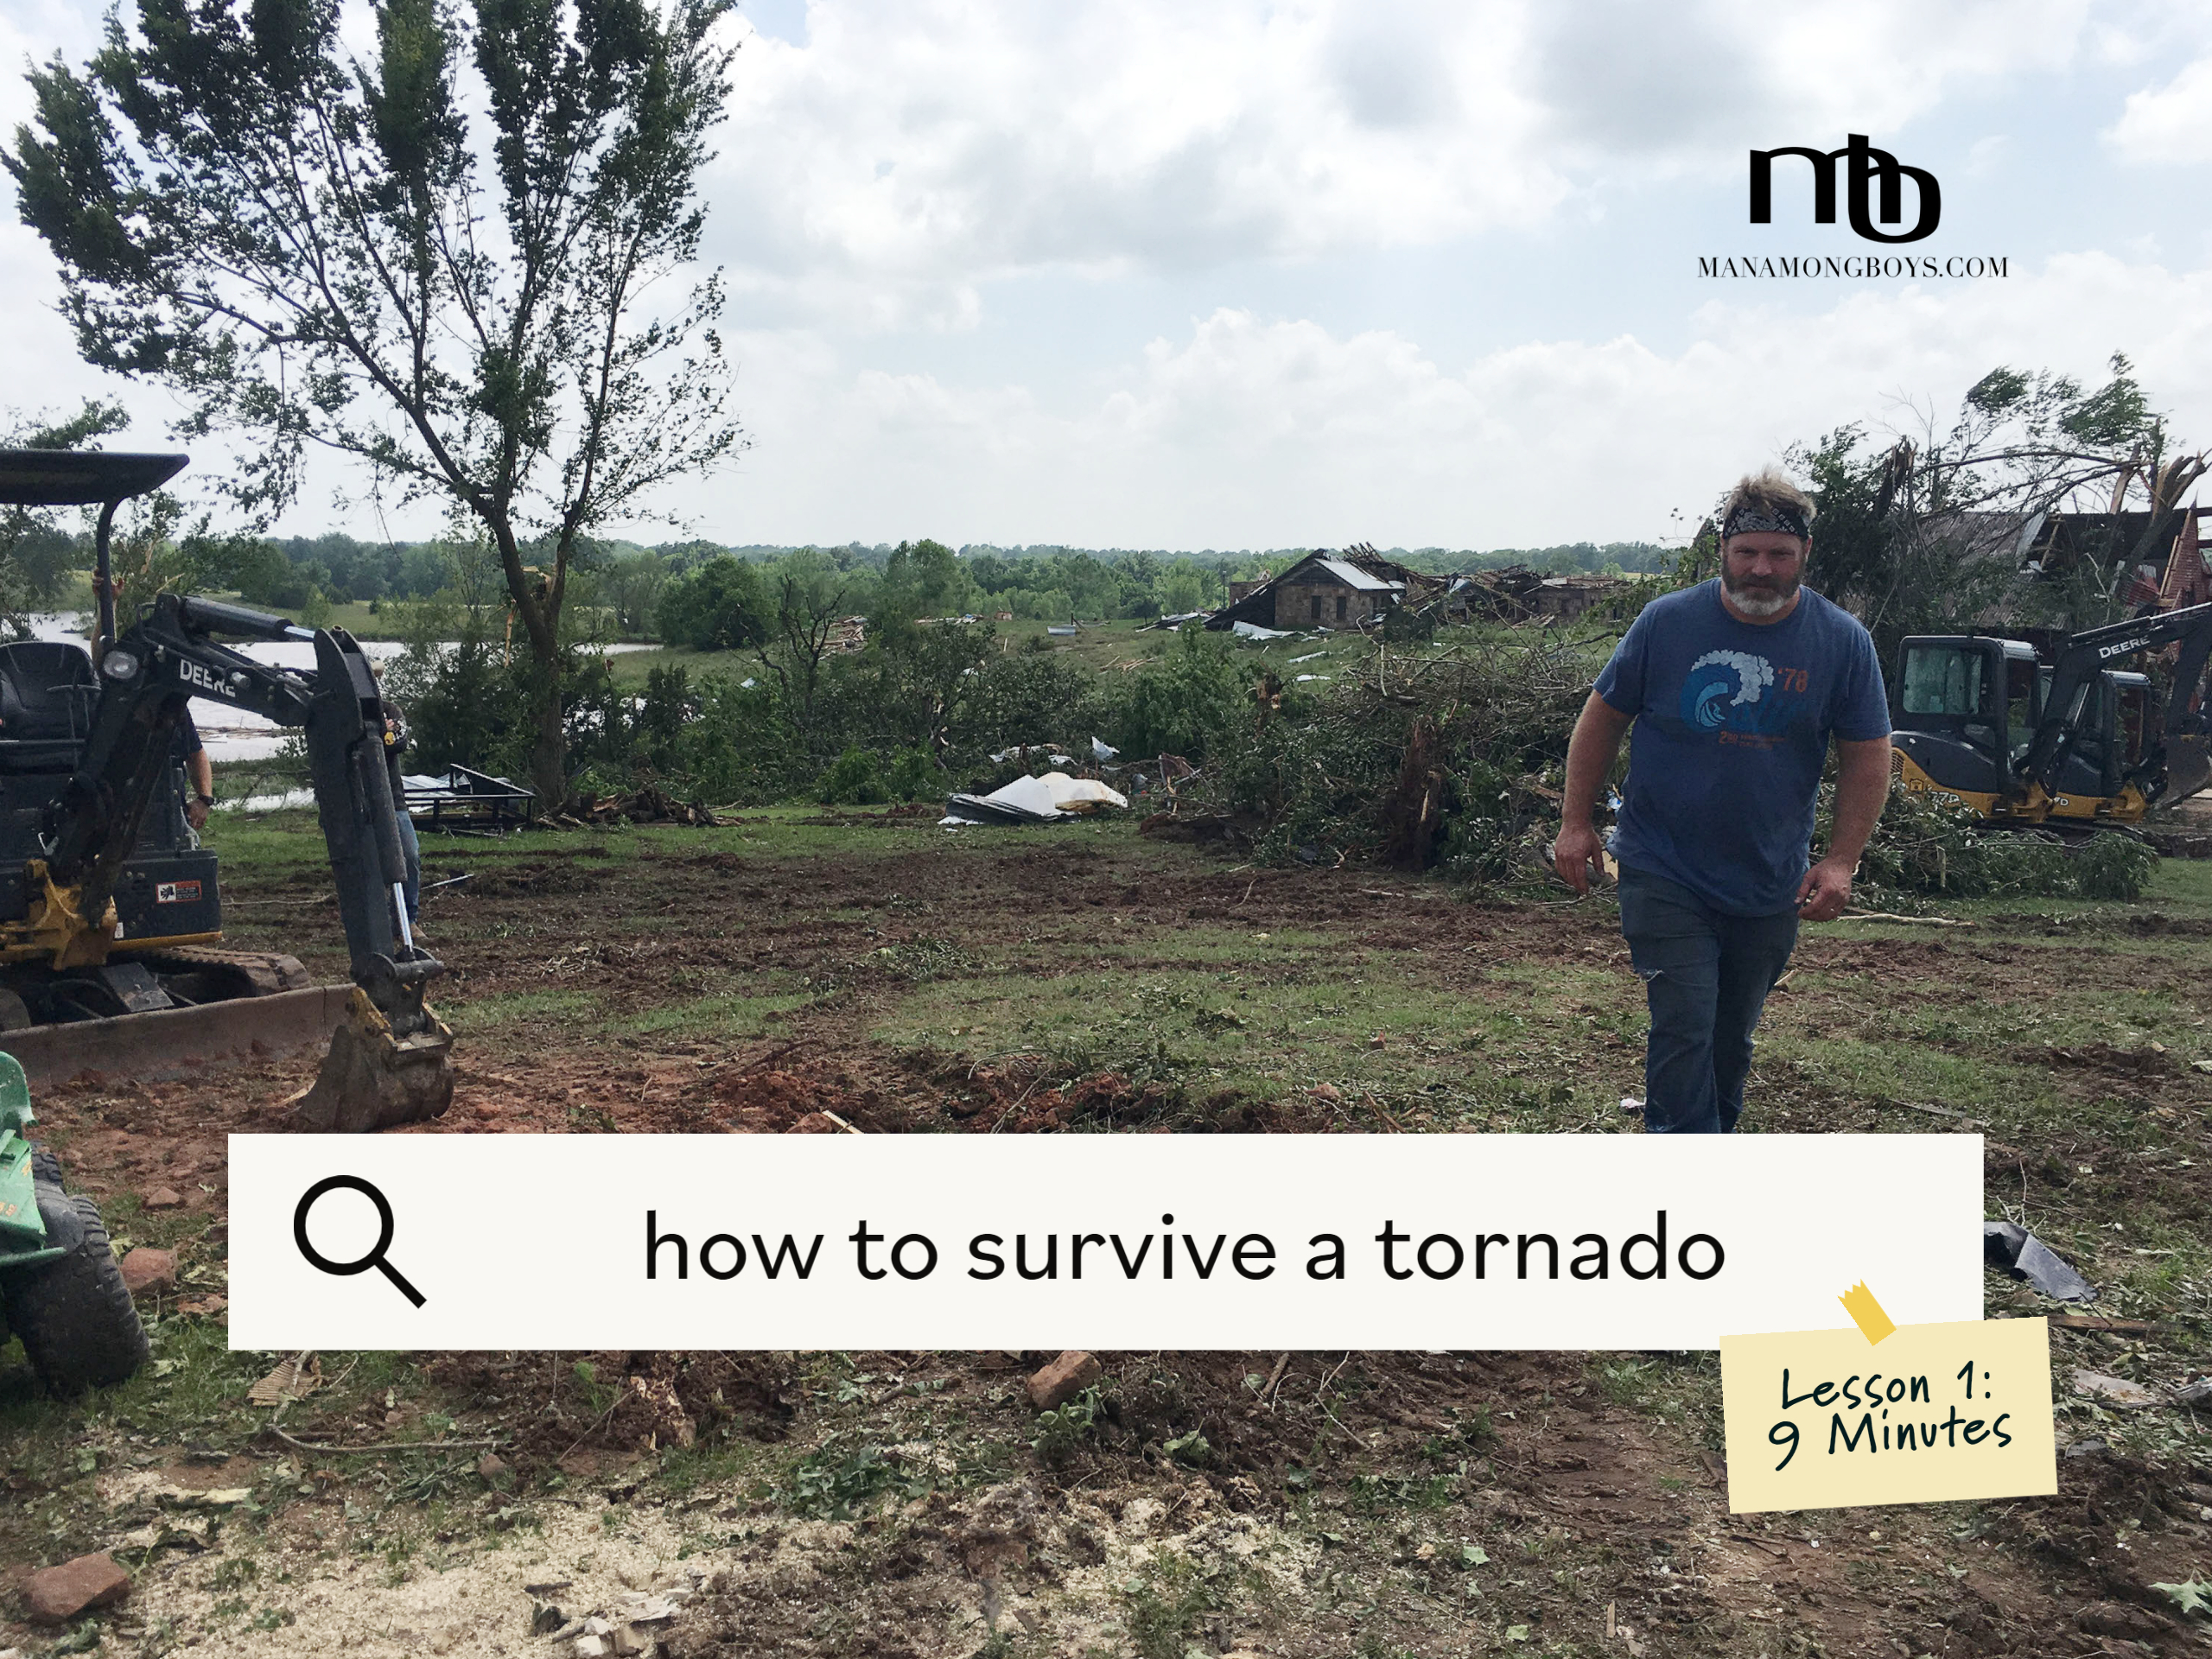 How to Survive a Tornado – Lesson 1